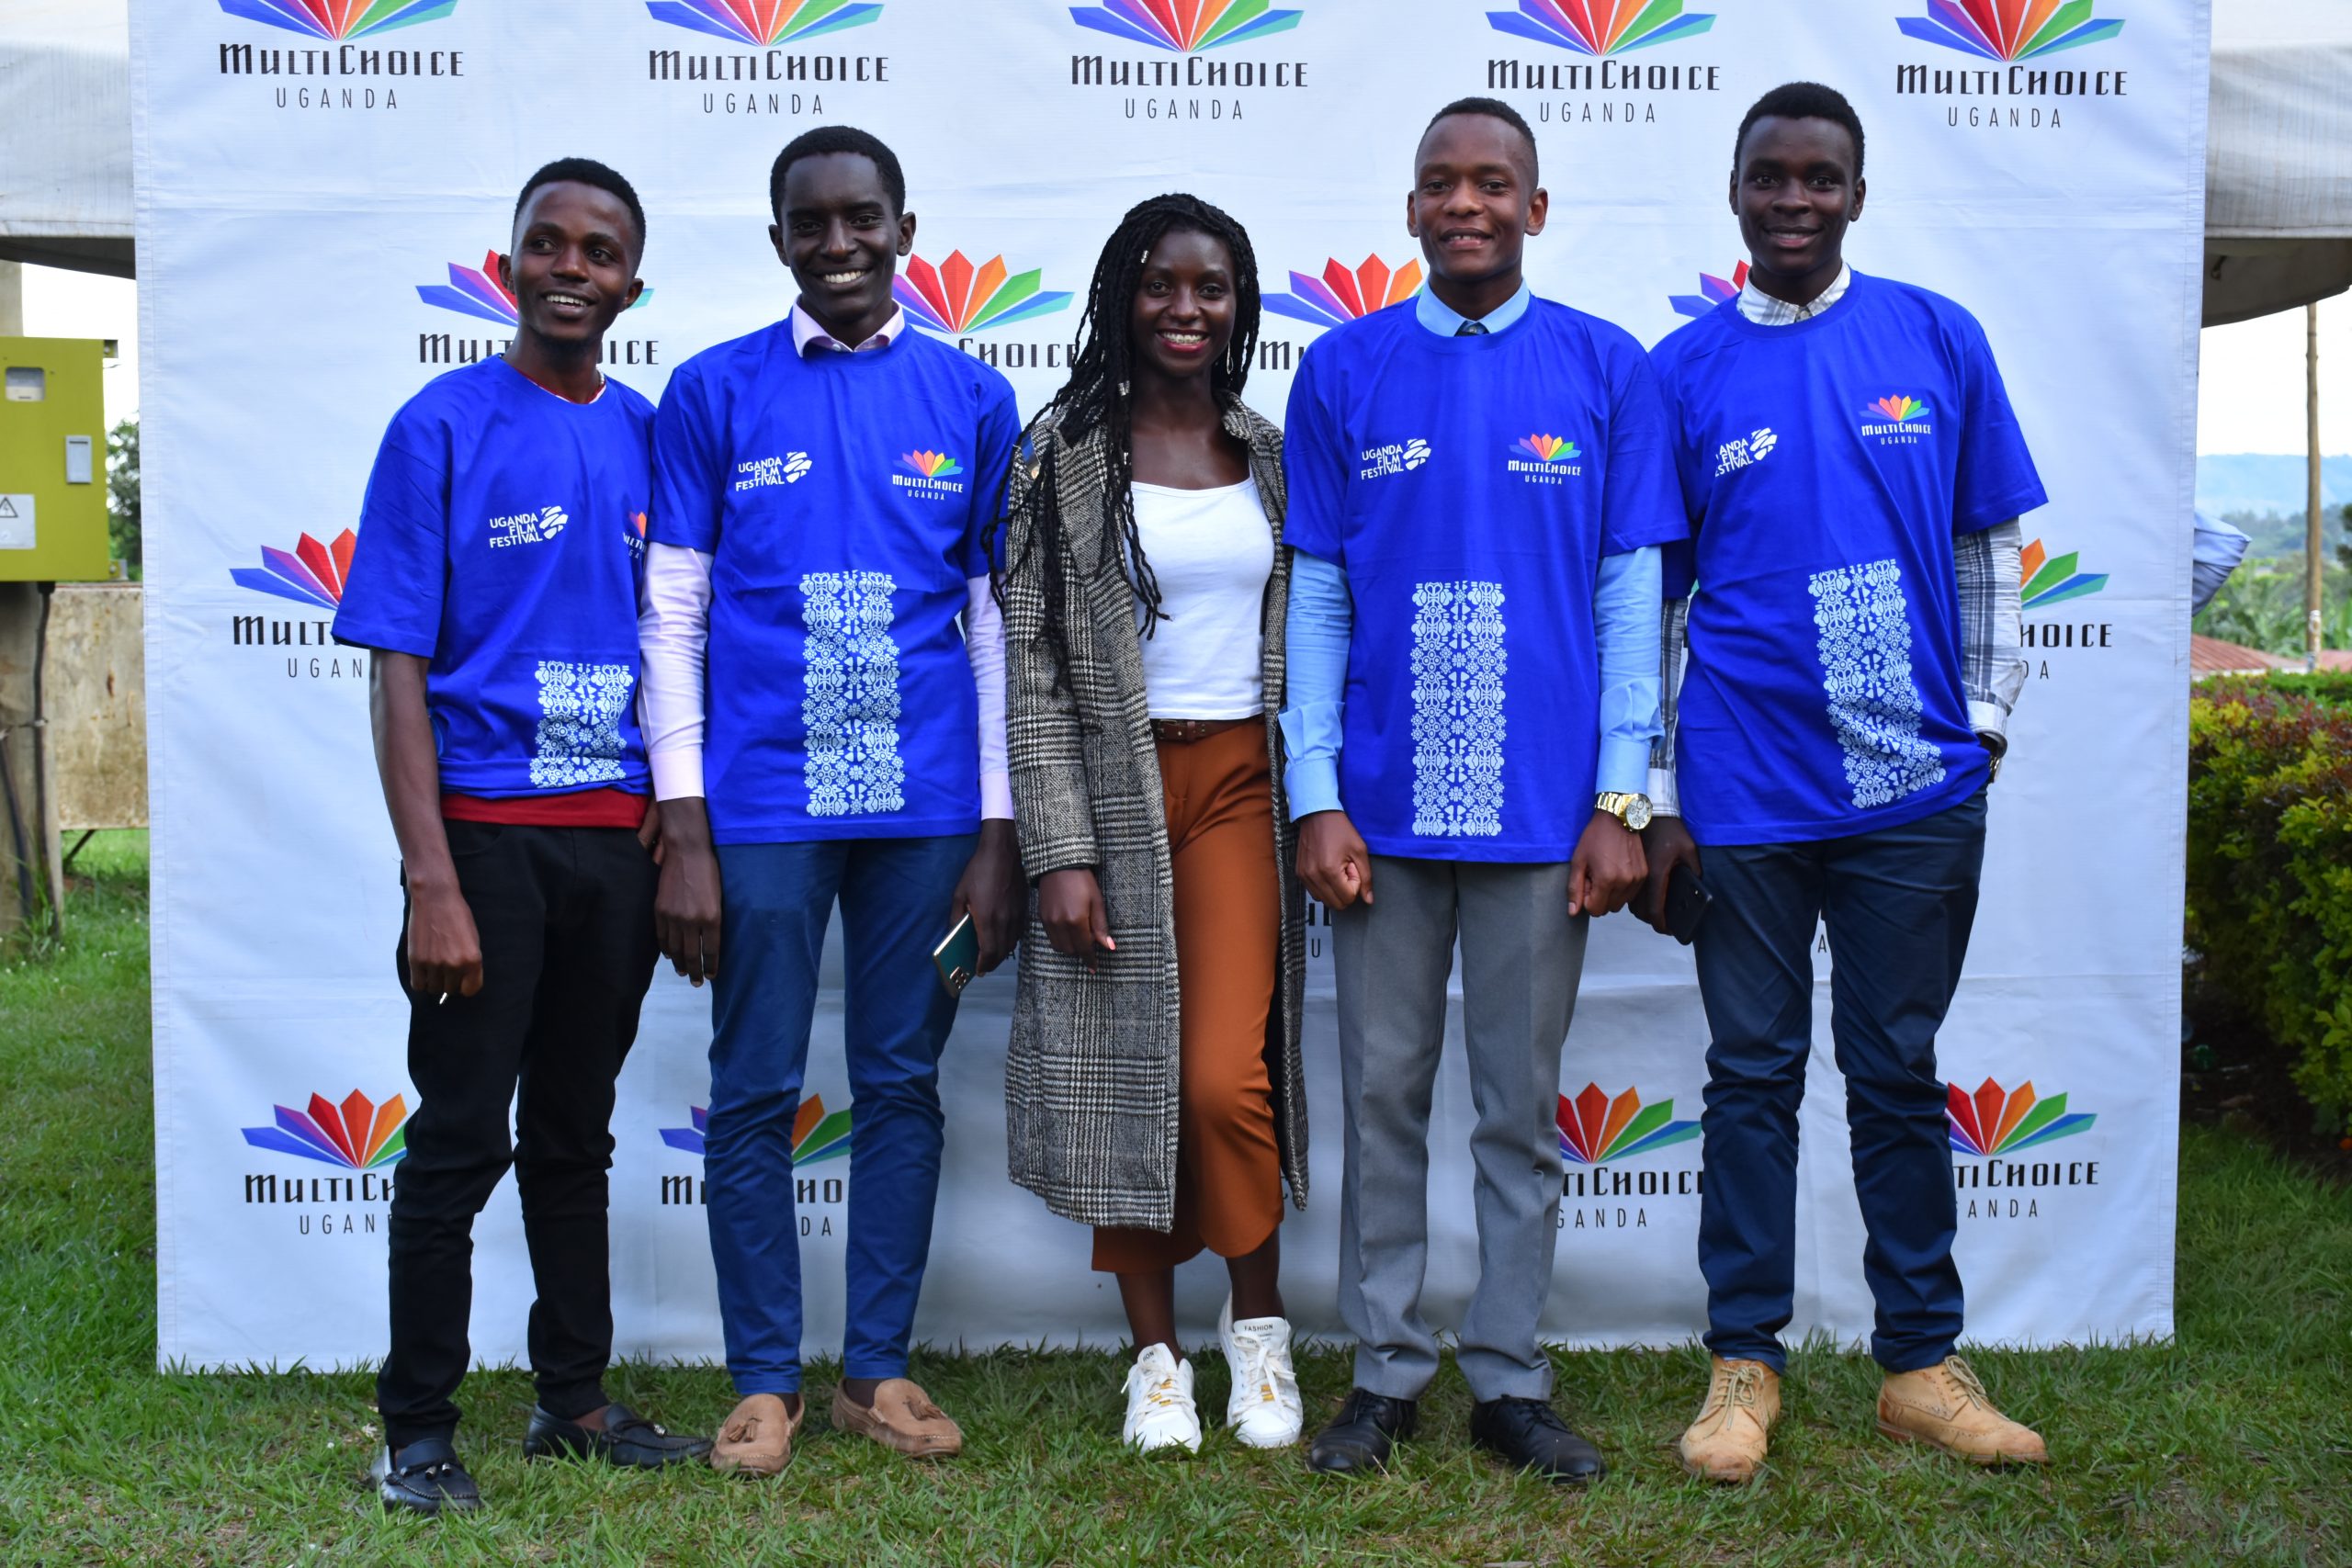 MultiChoice Trains MUBS Mbarara University Students in Filmmaking With Smartphones